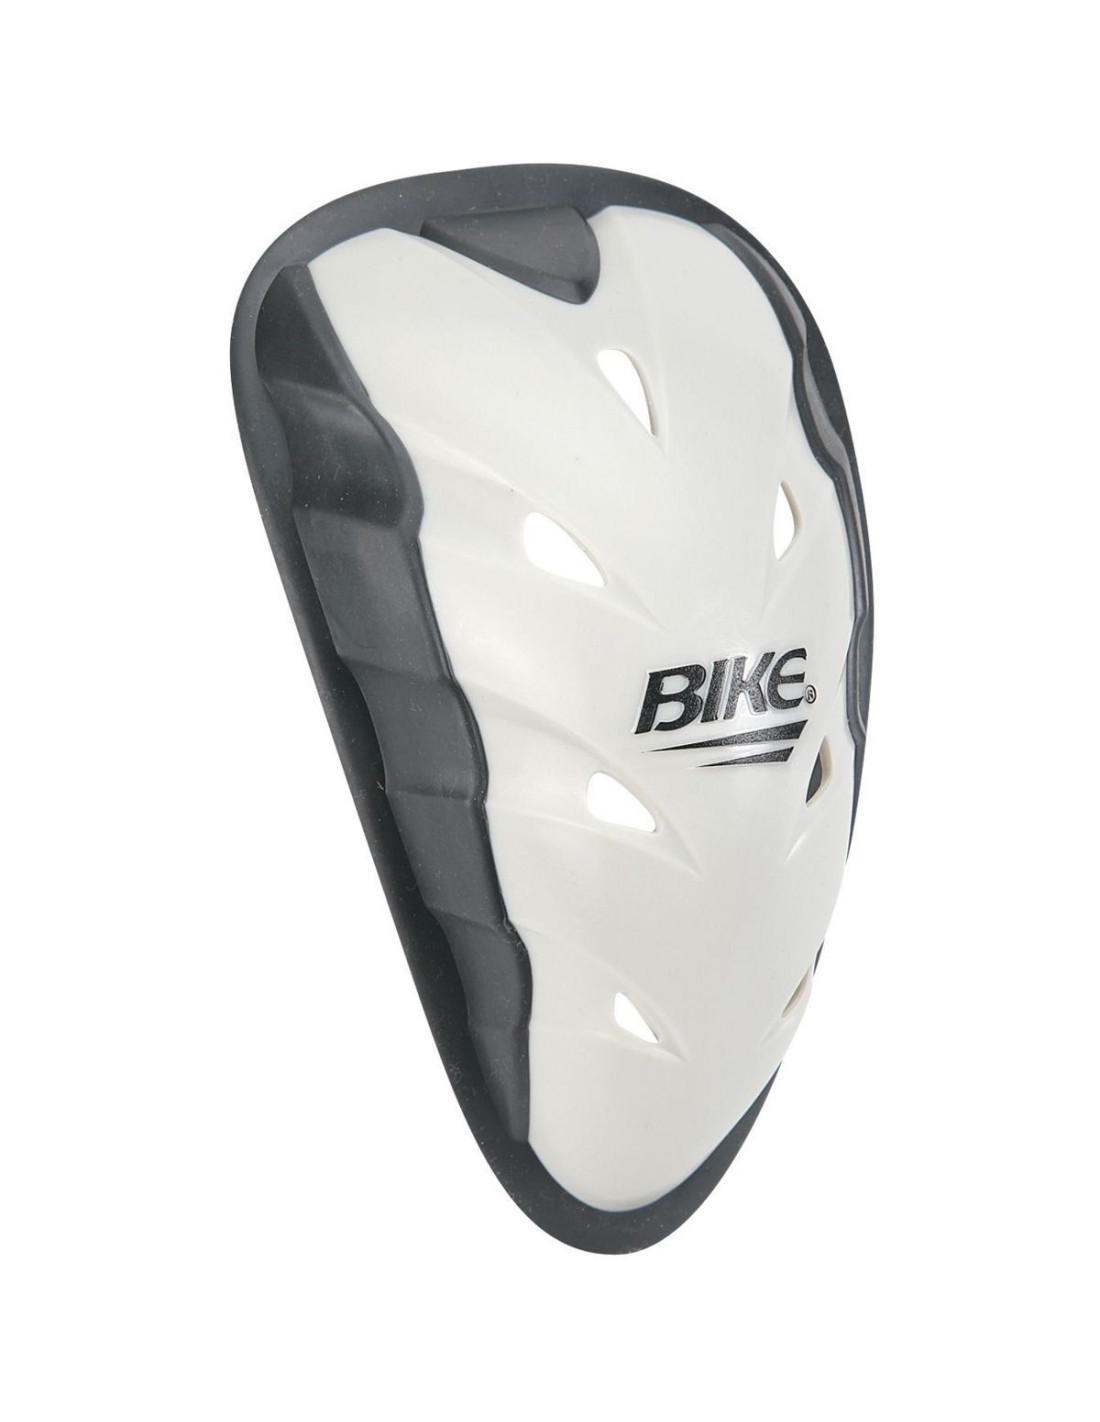 Bike Athletic Pro Edition Adult Protective Cup Black Xx-large Tall for sale online 